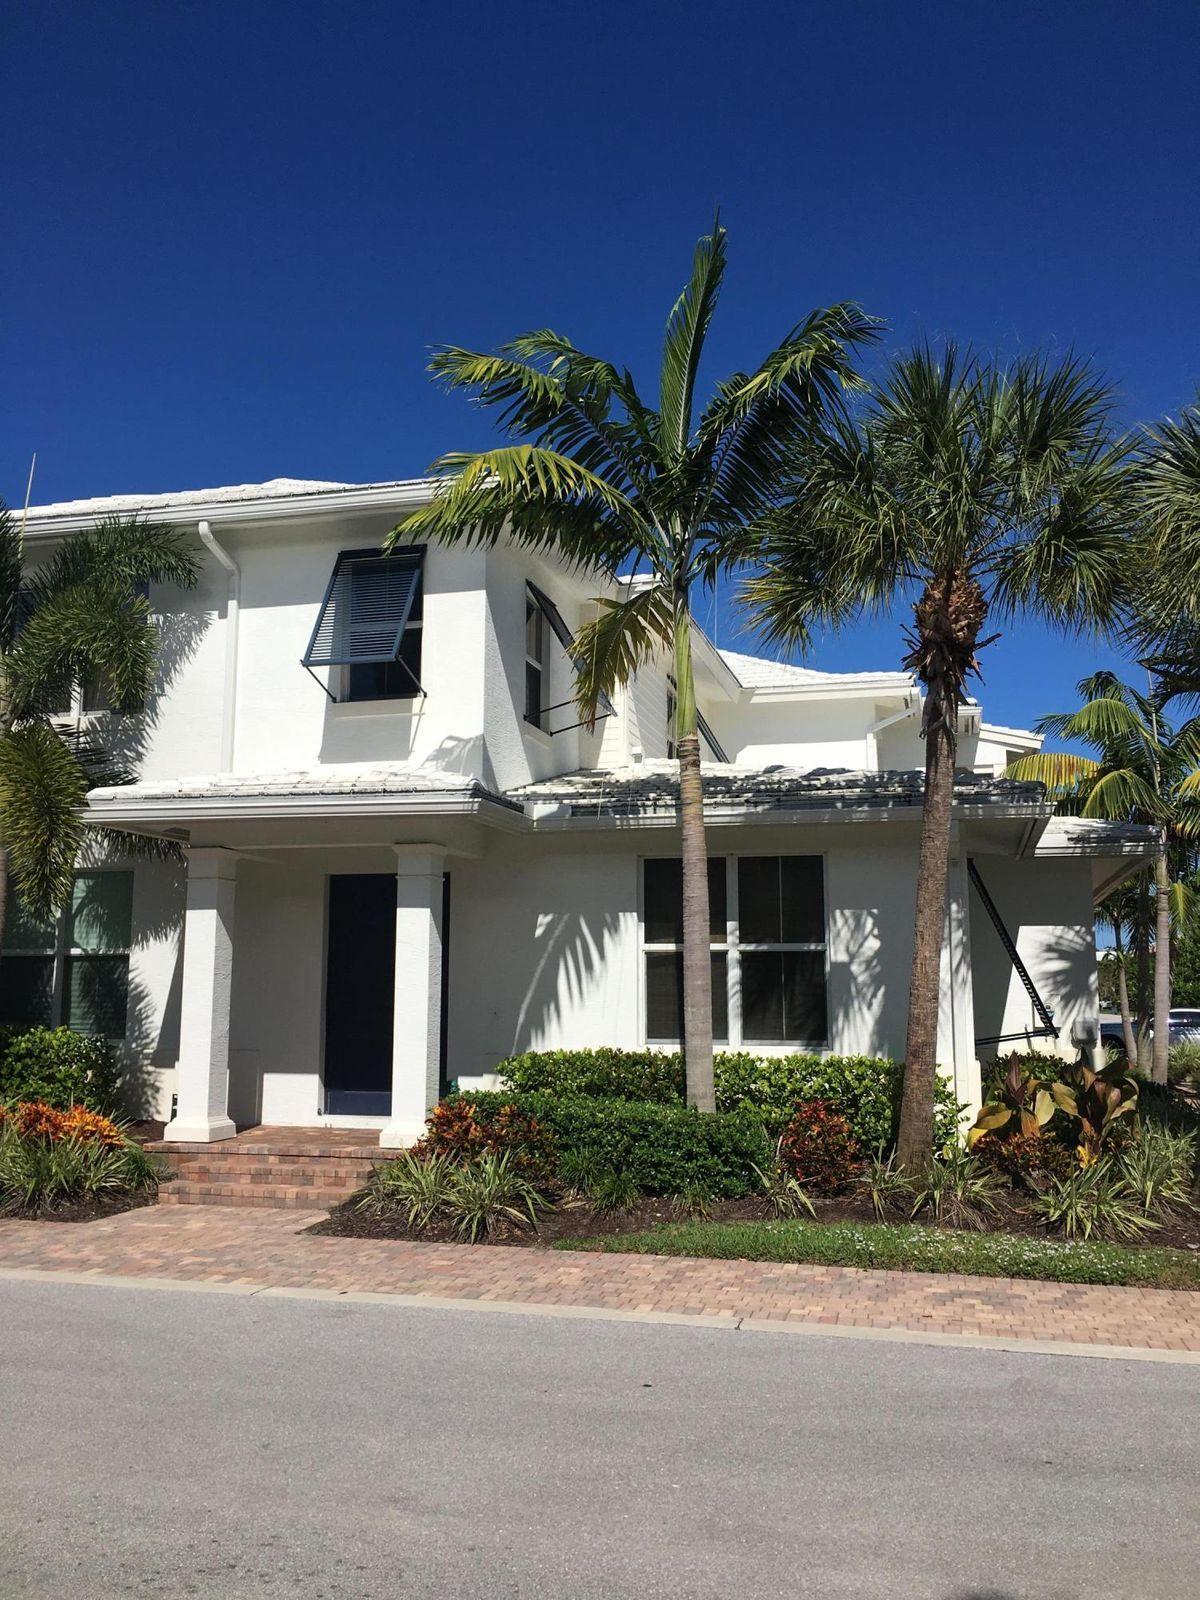 front view of house with potted plants and palm trees